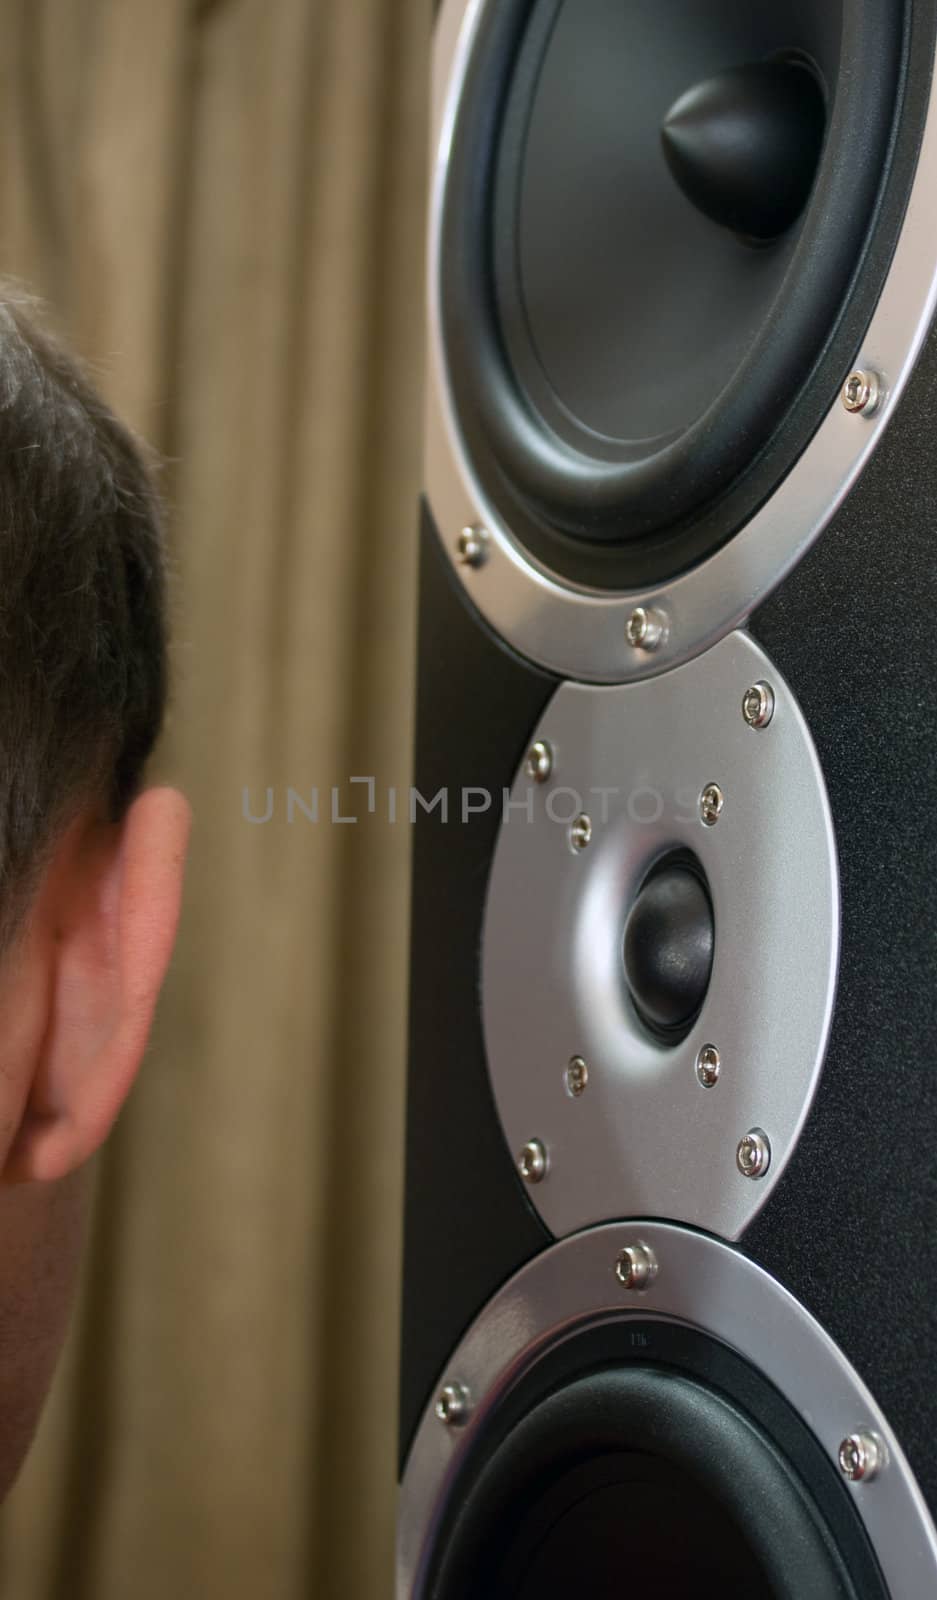 Audiophile speakers. Man listens to music pressed his ear